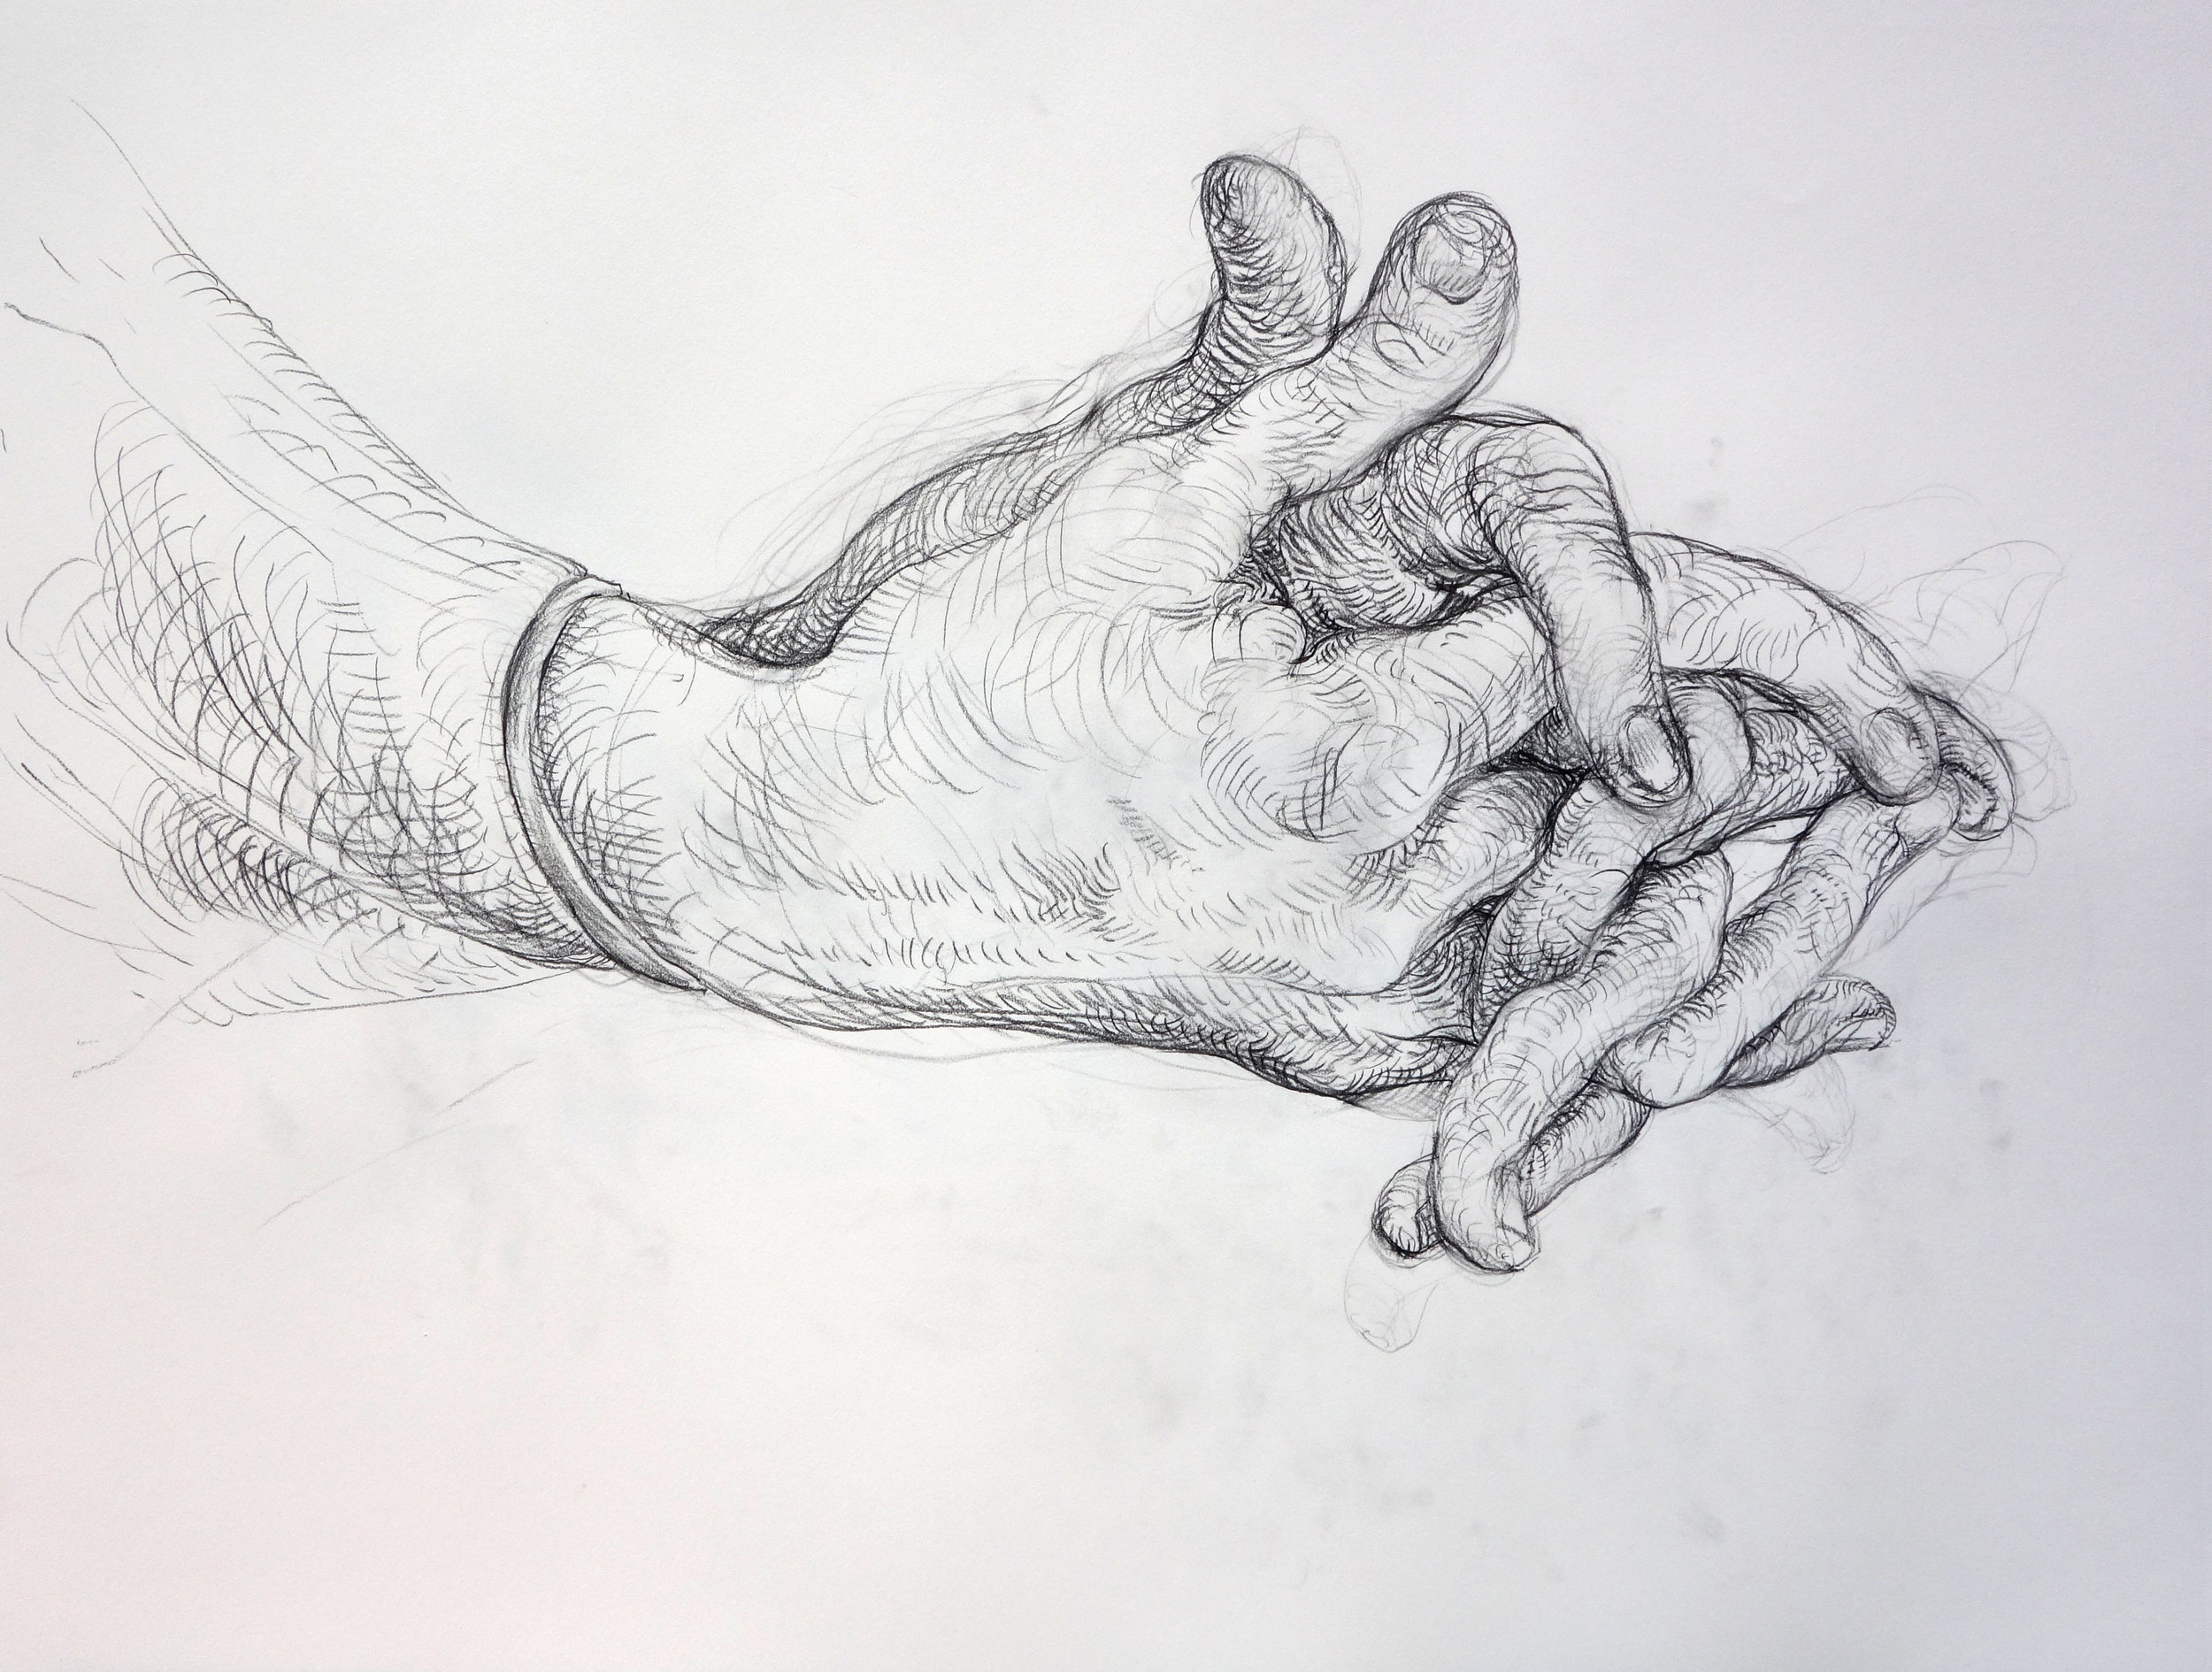 CLASPED HANDS, 2013?